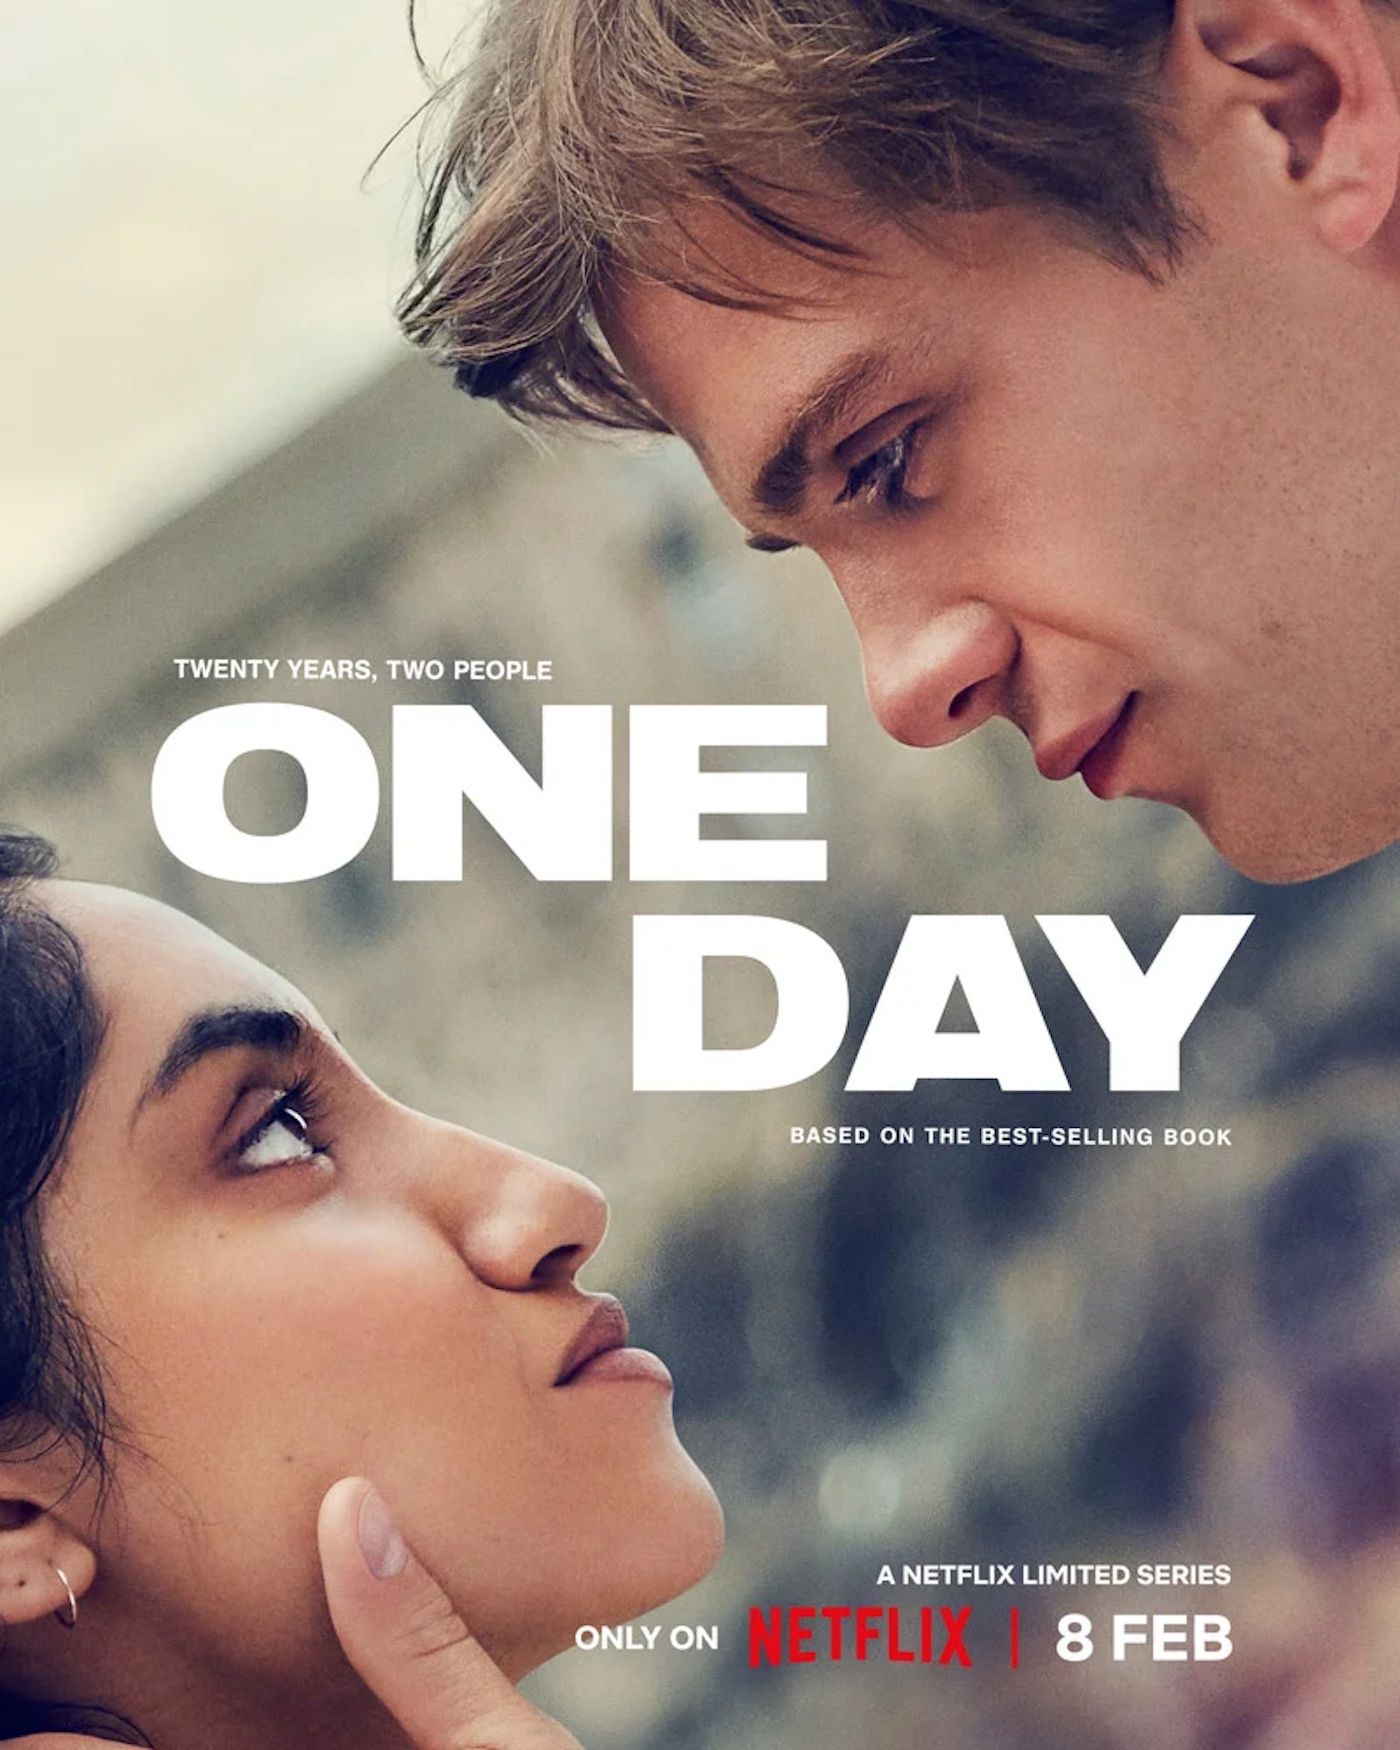 One Day Poster copy